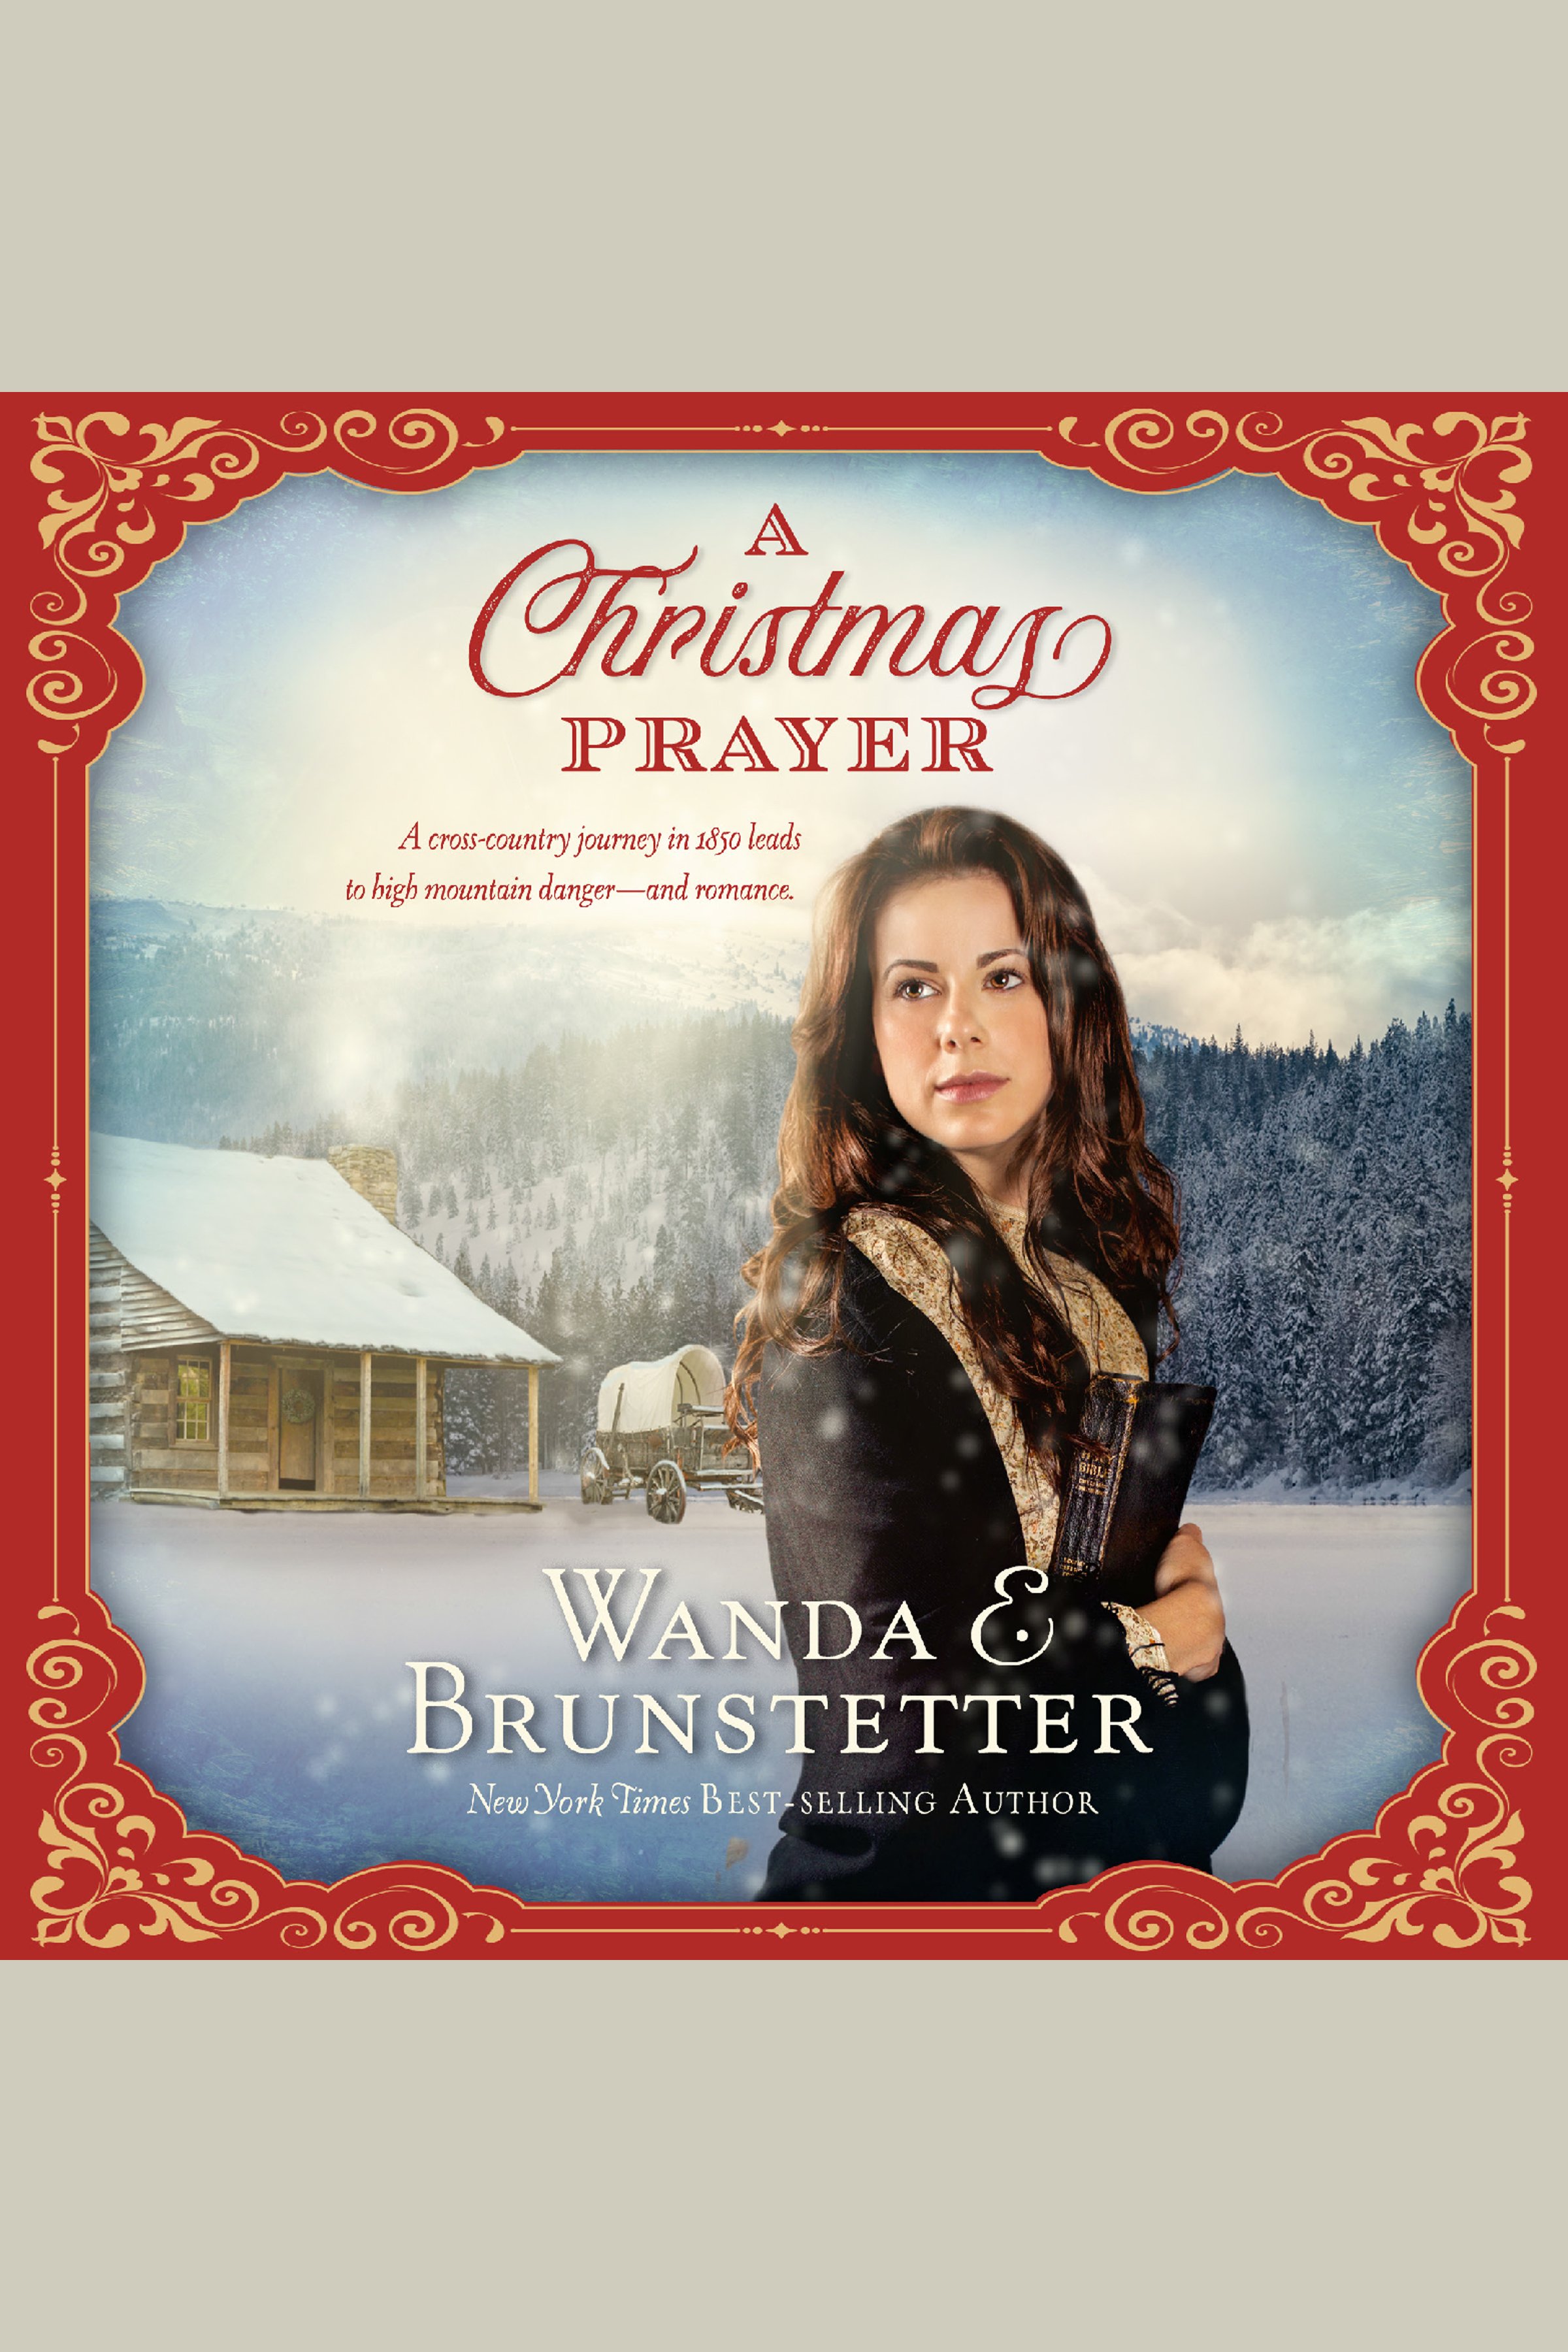 Image de couverture de Christmas Prayer, A [electronic resource] : A Cross-country Journey in 1850 Leads to High Mountain Danger - and Romance